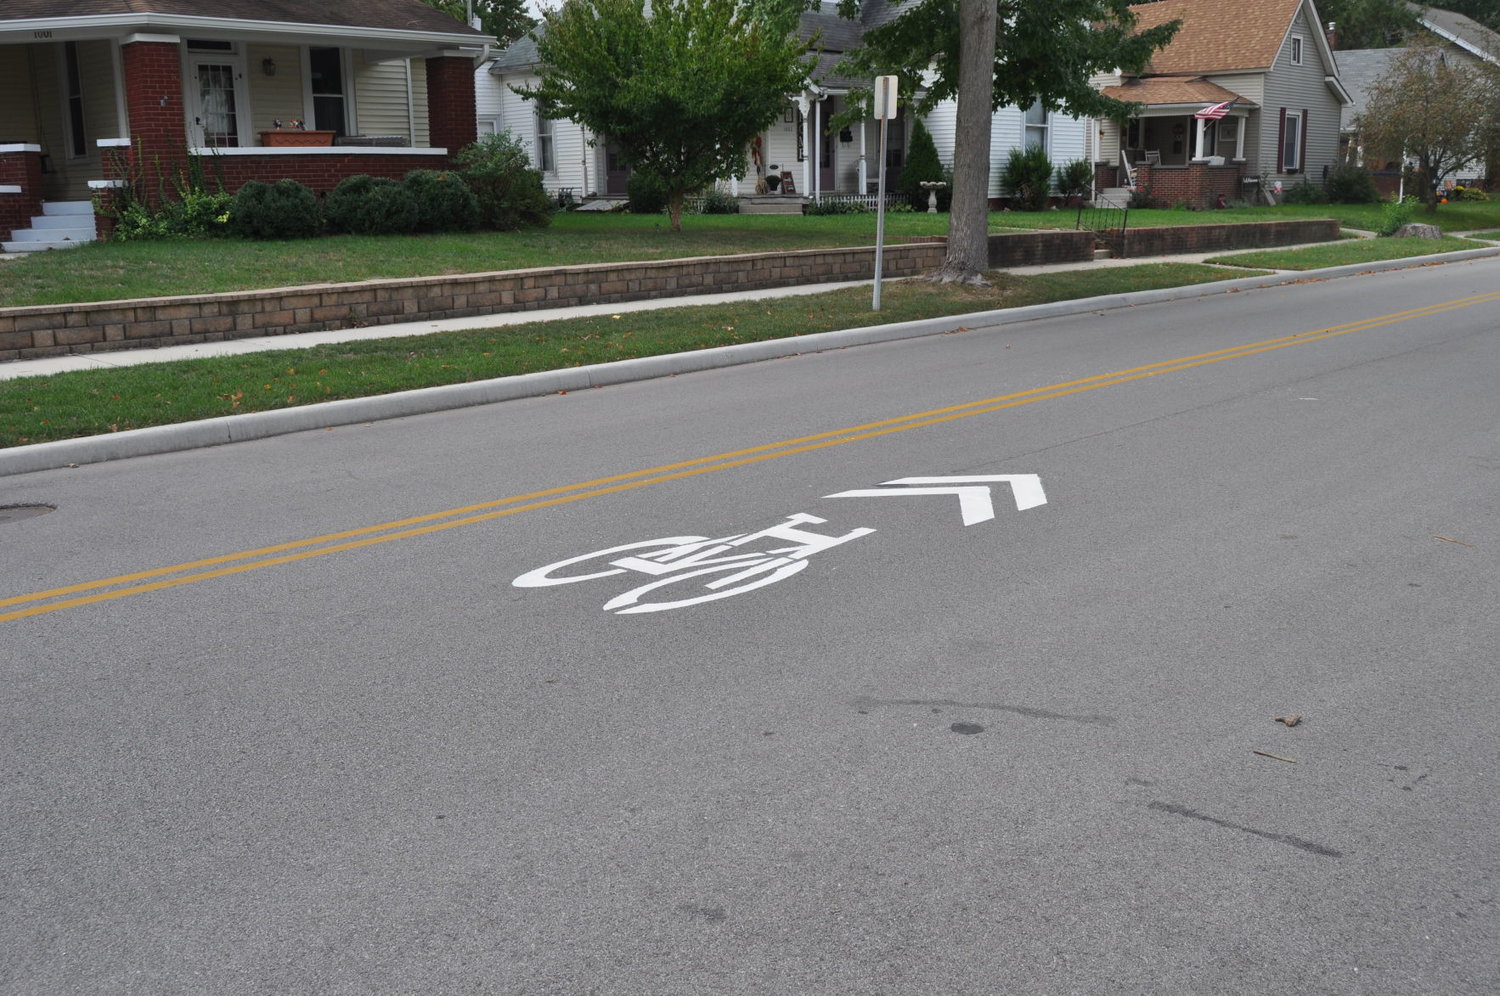 Bike arrow markings have been painted on city streets to help identify the bike path.